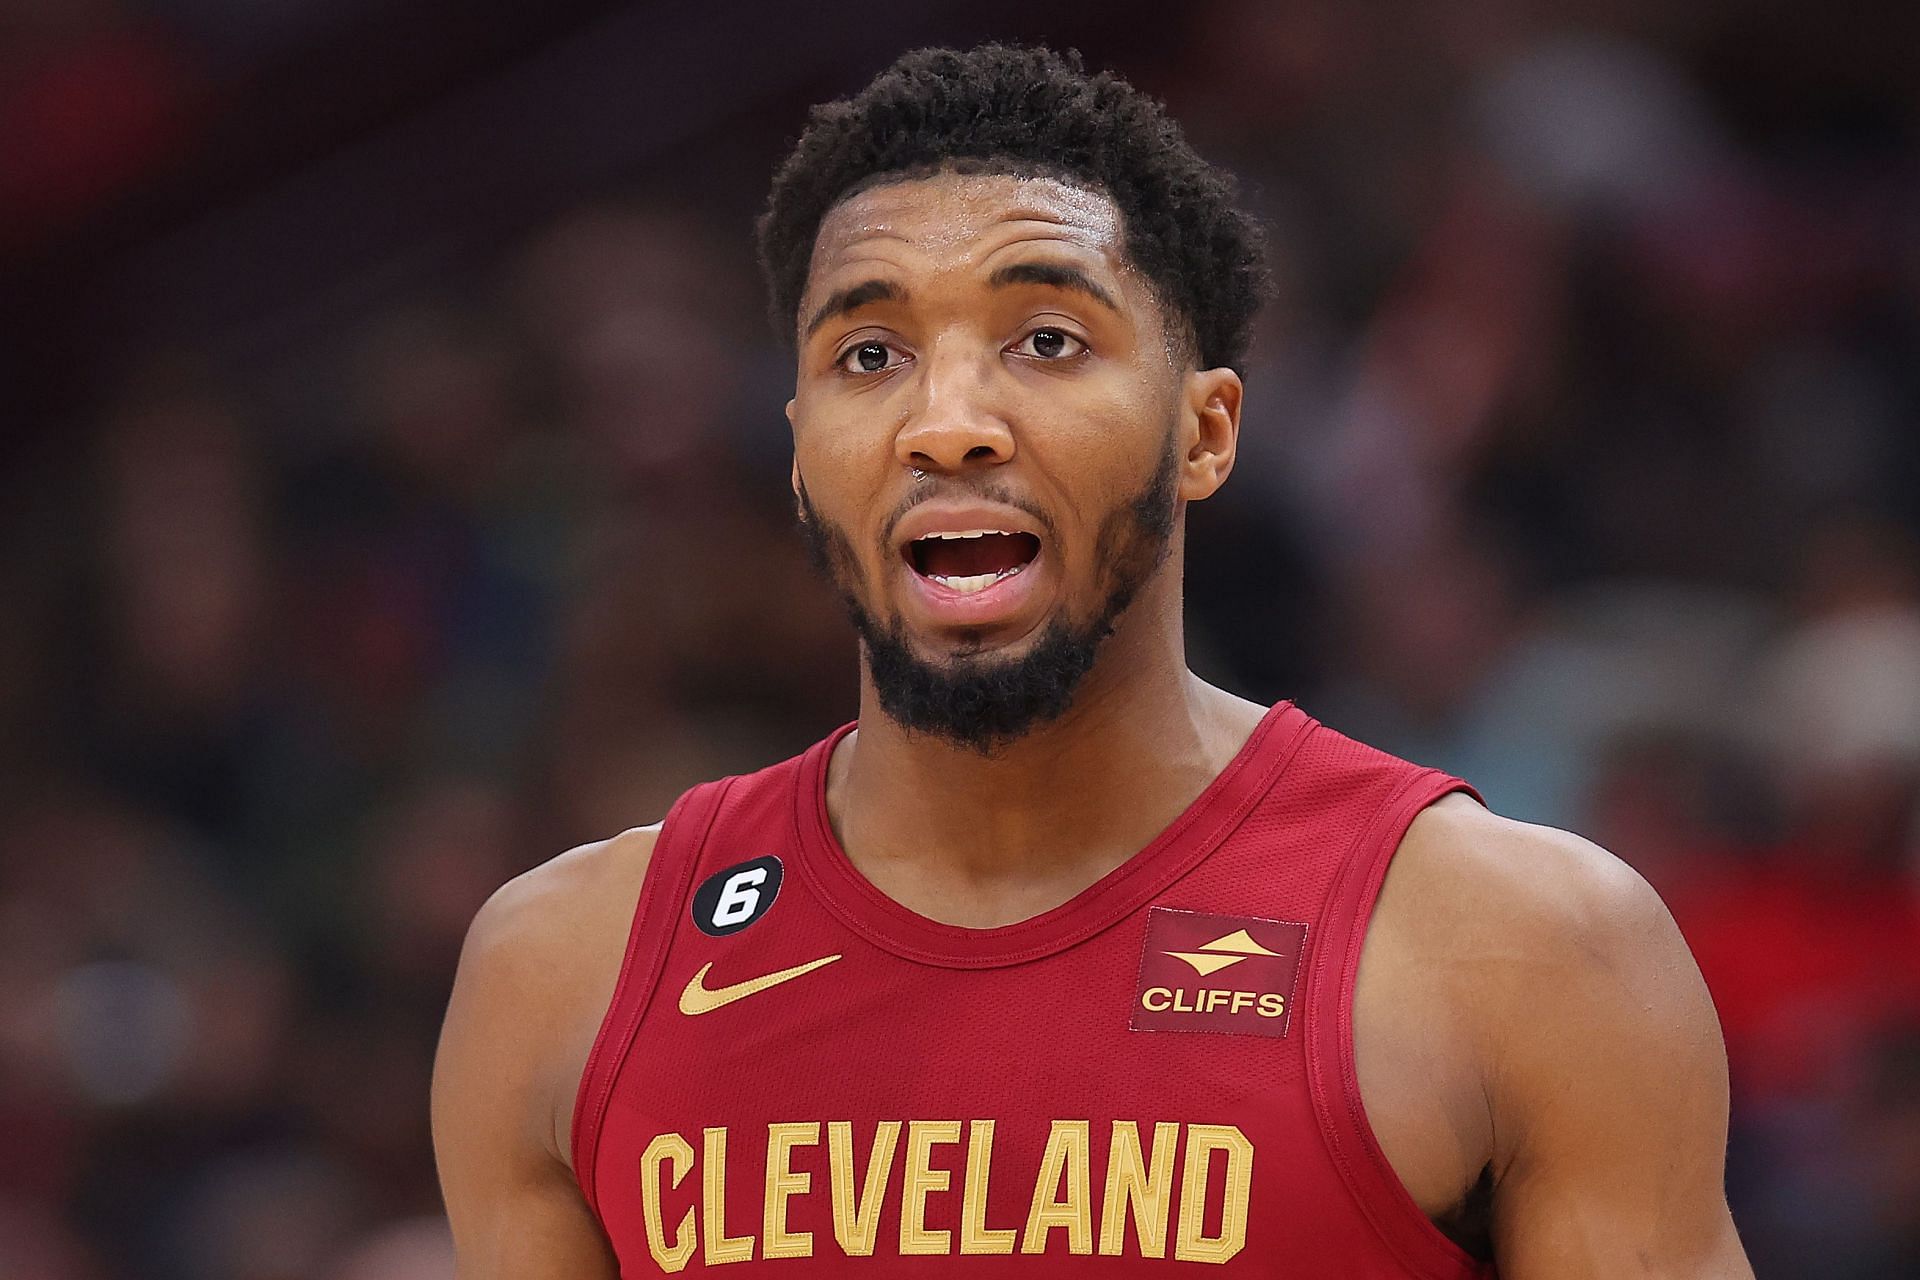 Cleveland Cavaliers All-Star shooting guard Donovan Mitchell